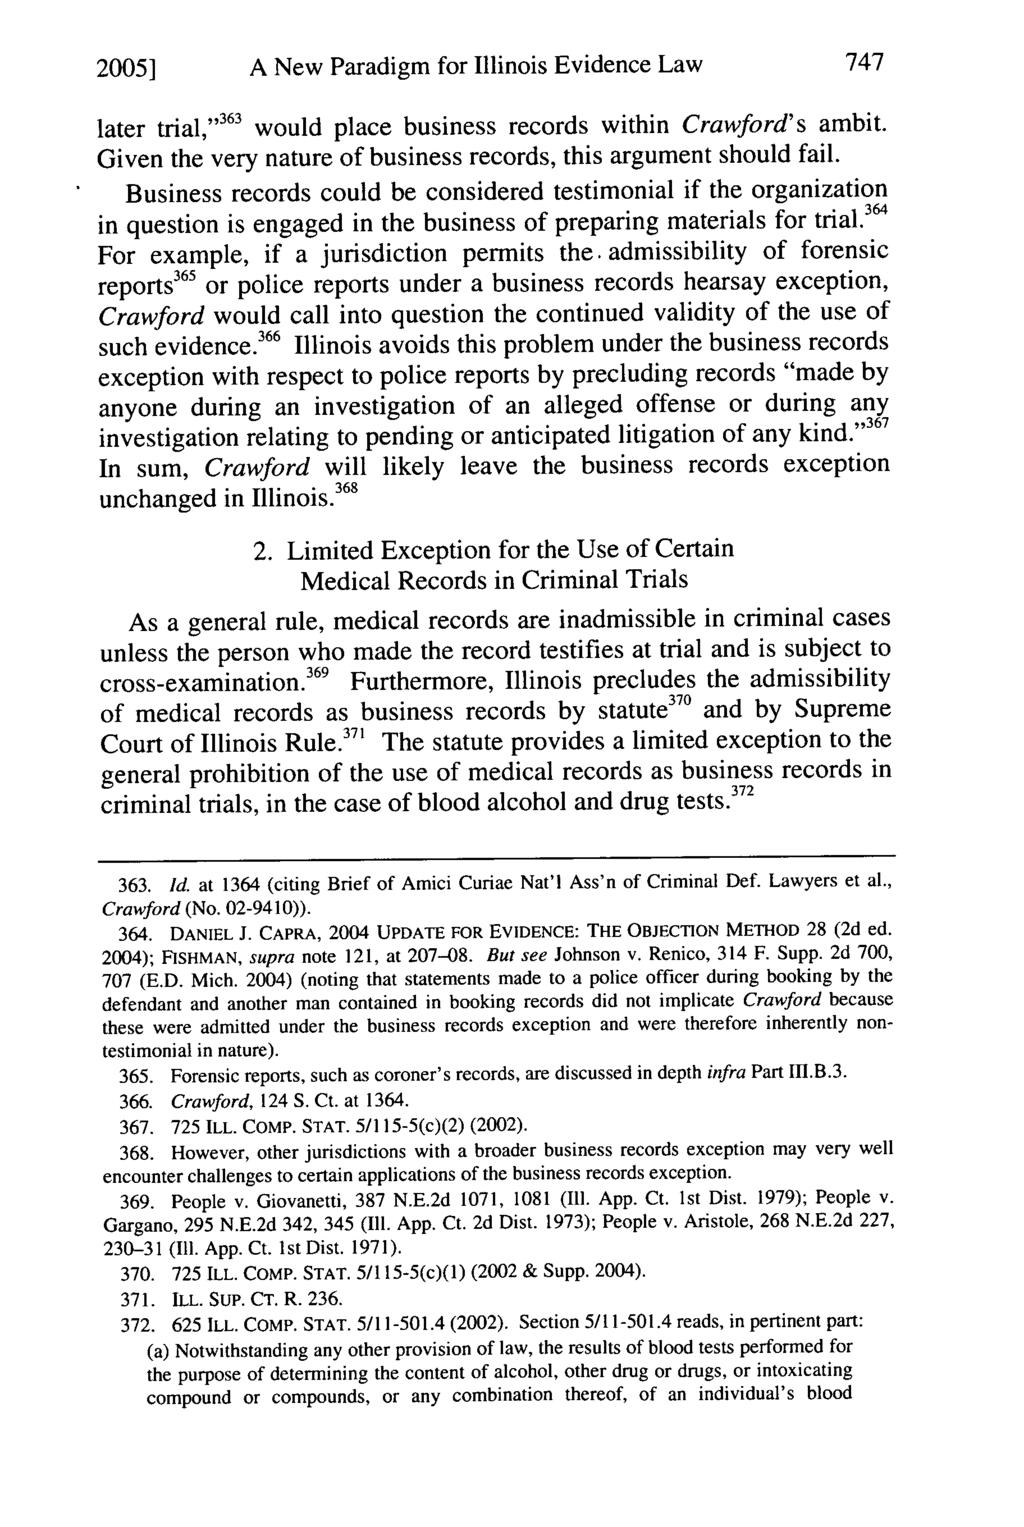 2005] A New Paradigm for Illinois Evidence Law later trial, 363 would place business records within Crawford's ambit. Given the very nature of business records, this argument should fail.